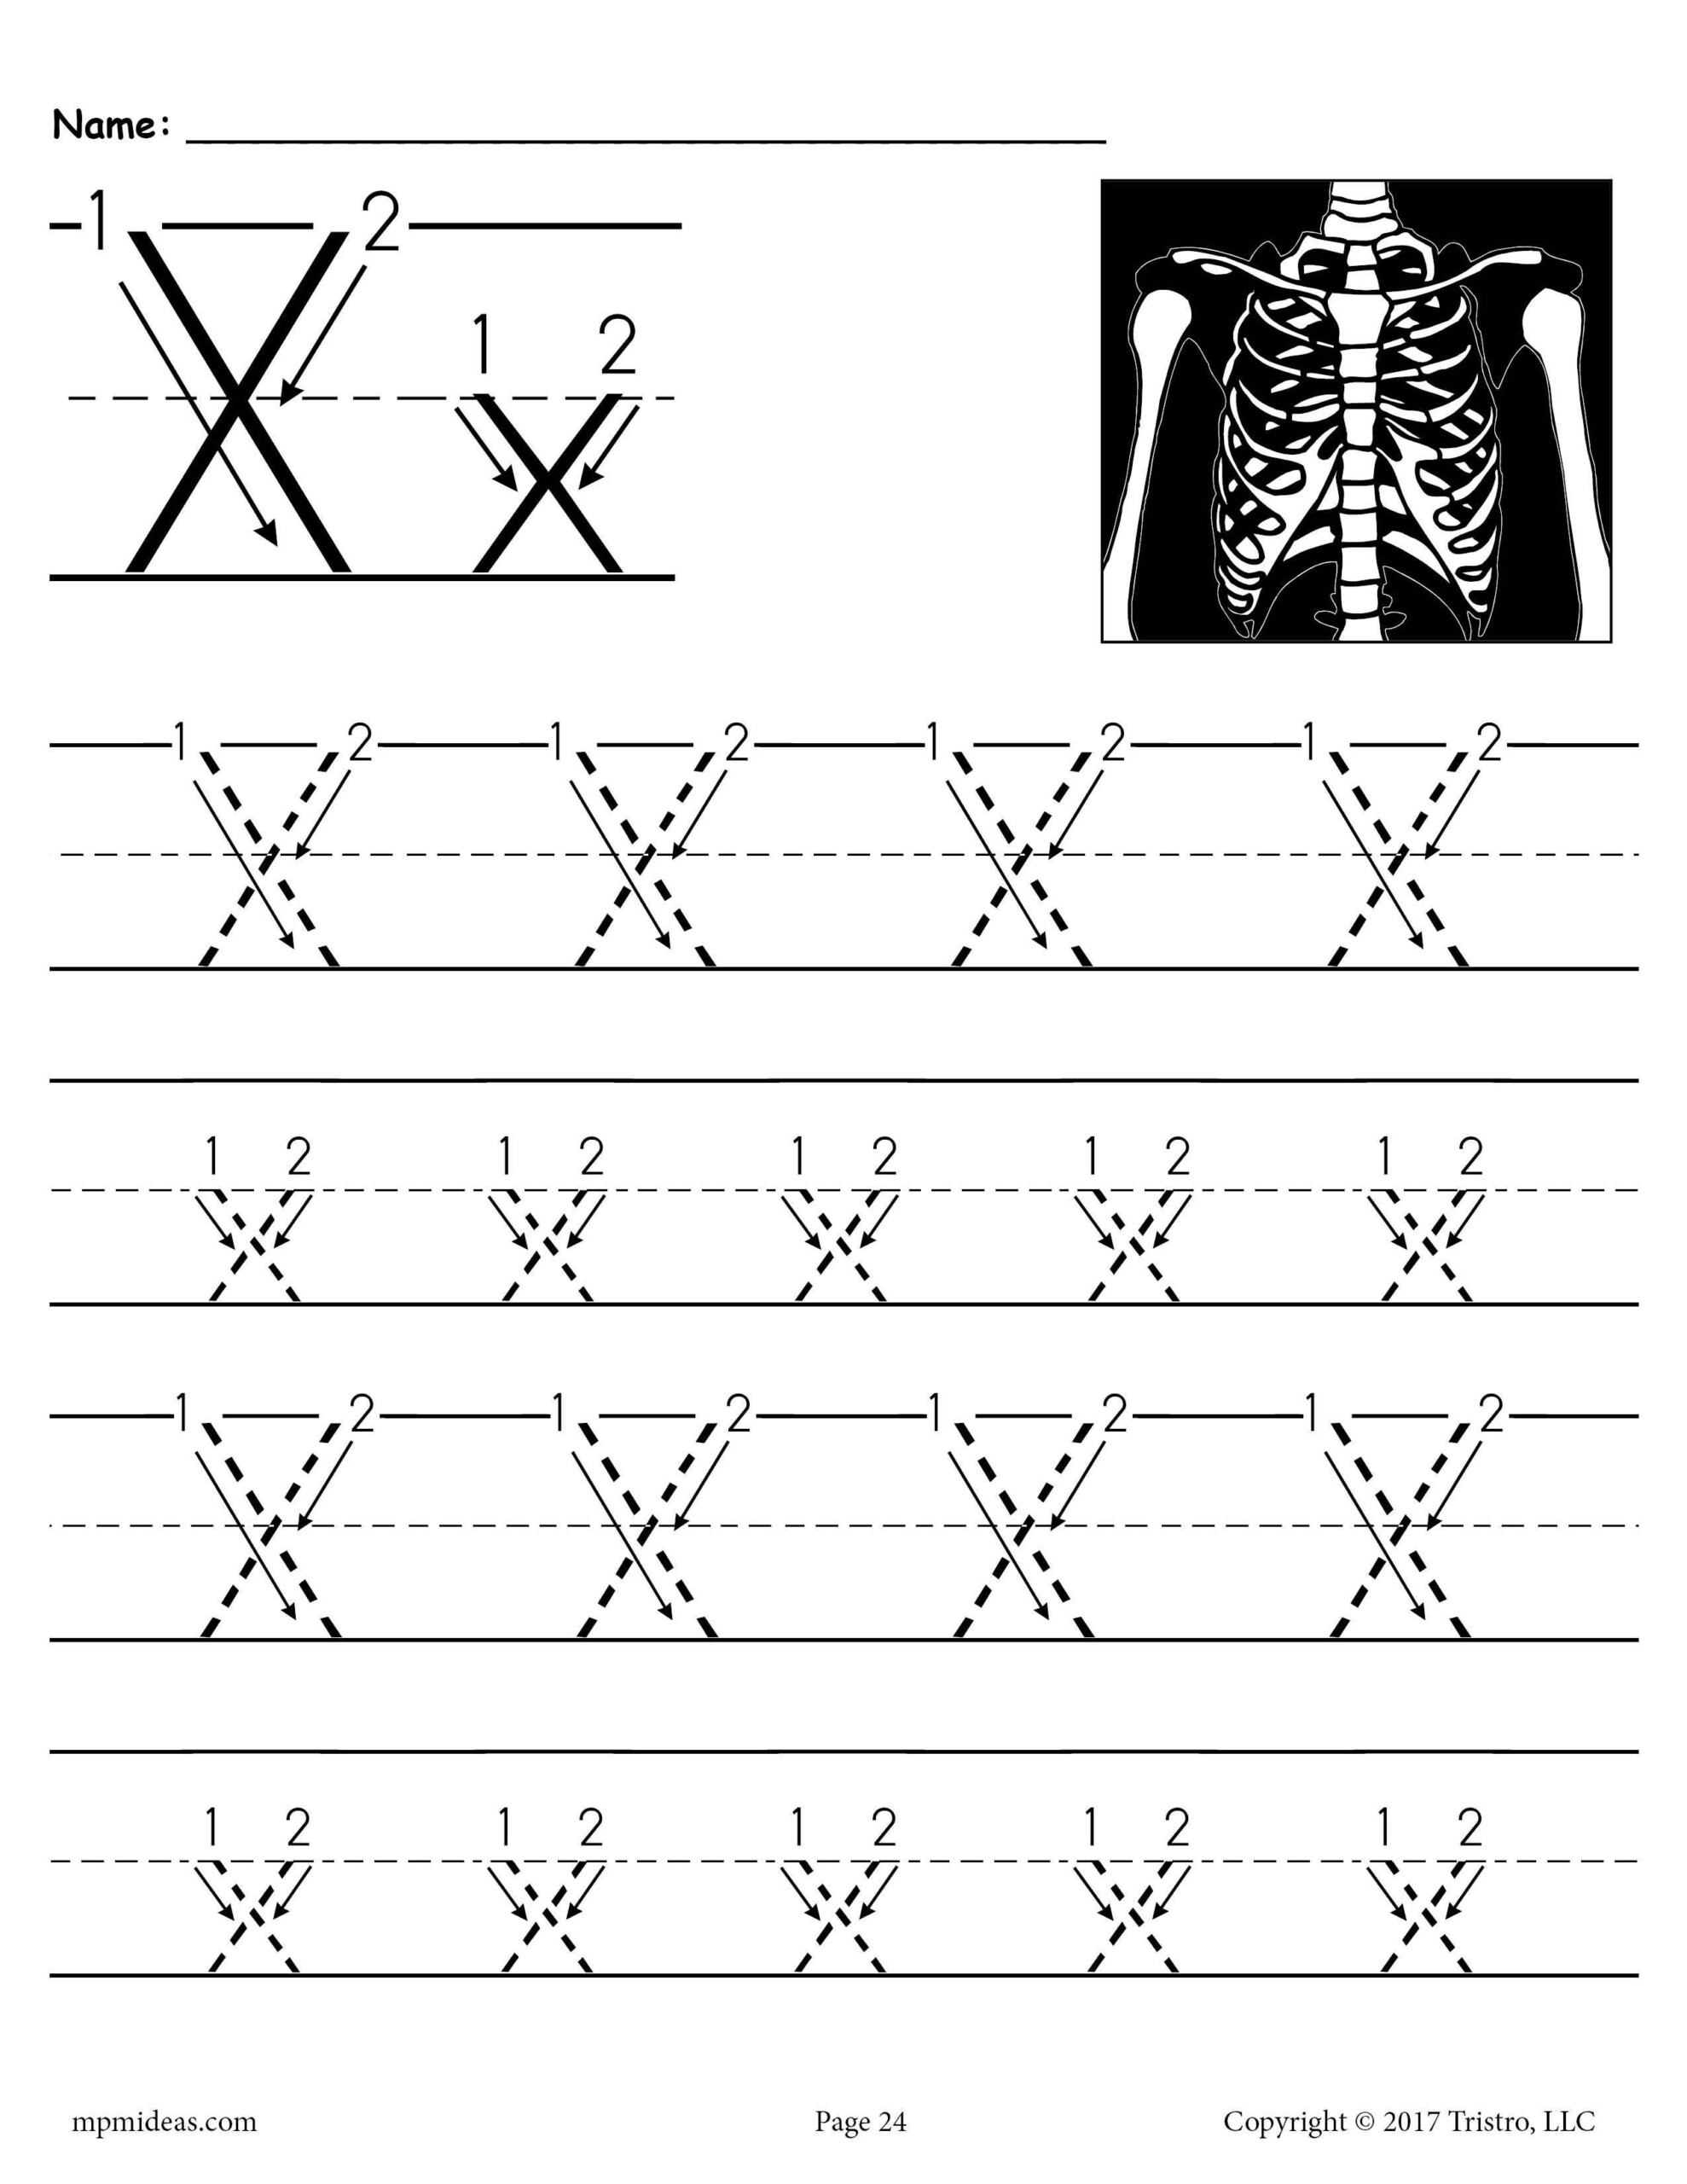 Printable Letter X Tracing Worksheet With Number And Arrow Guides